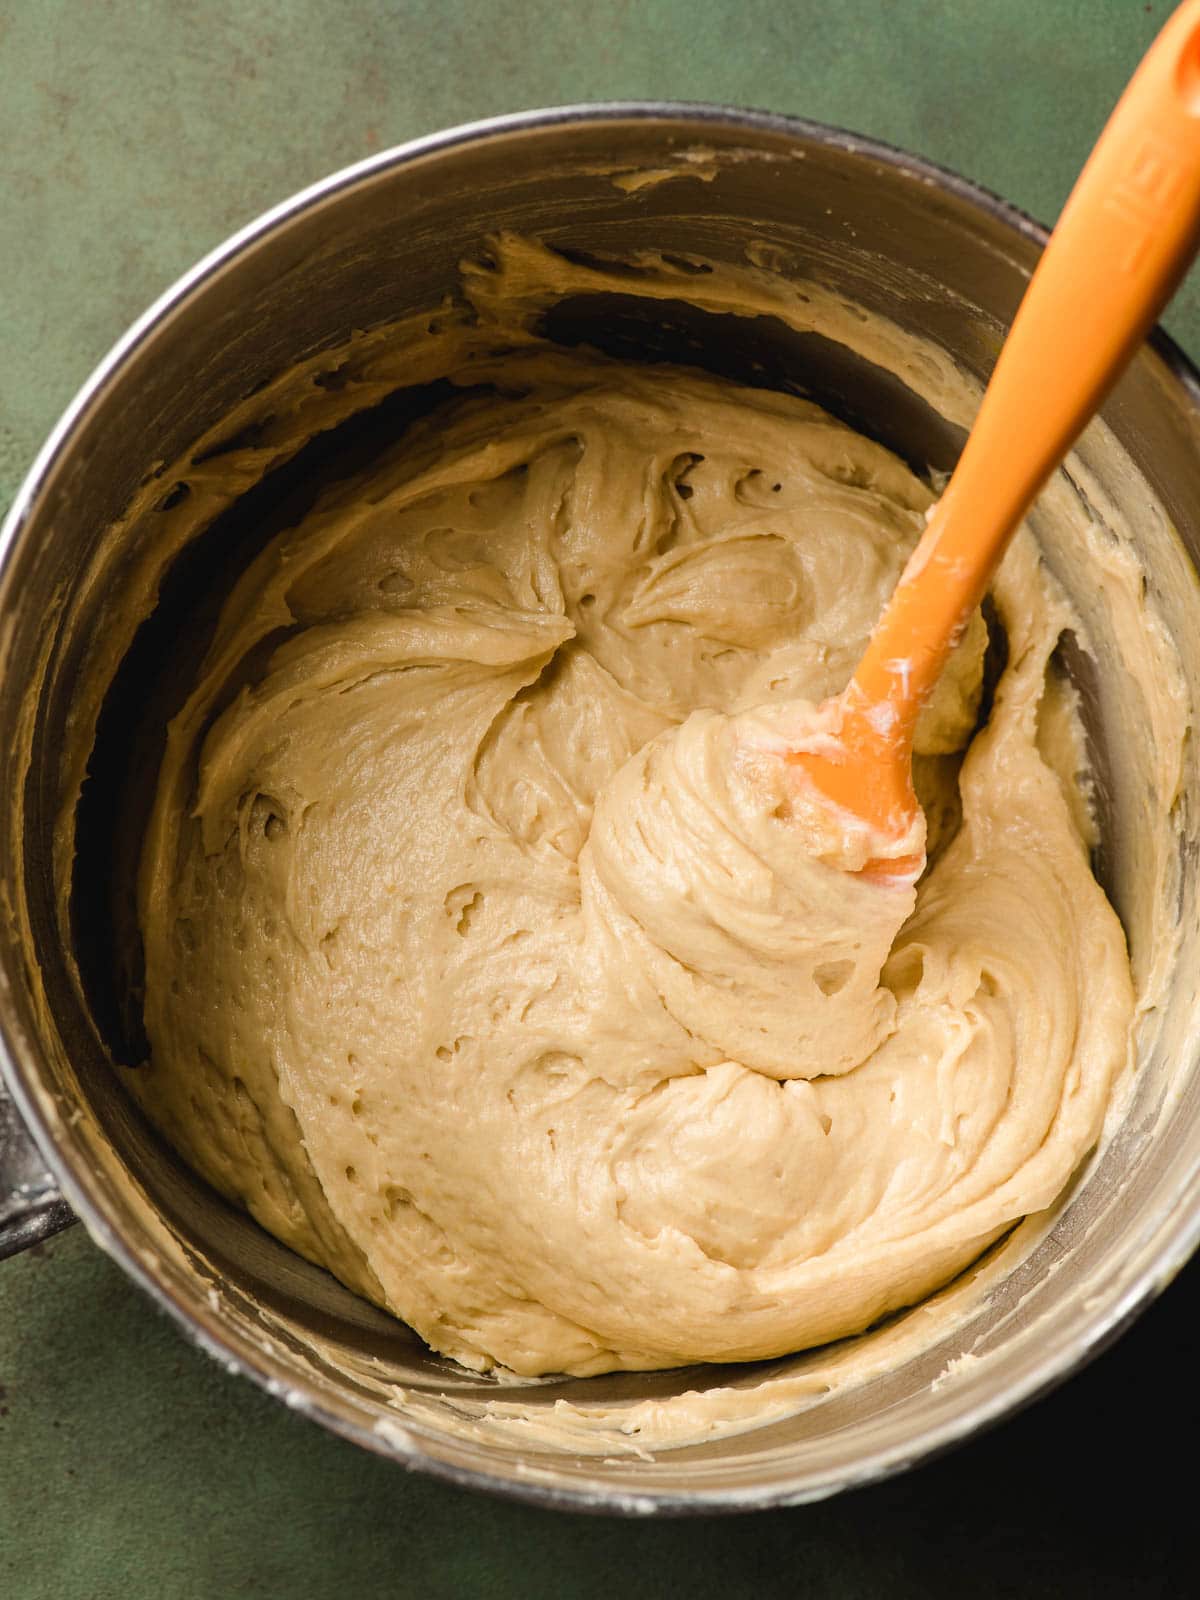 Bundt cake batter in a mixing bowl with an orange spatula.